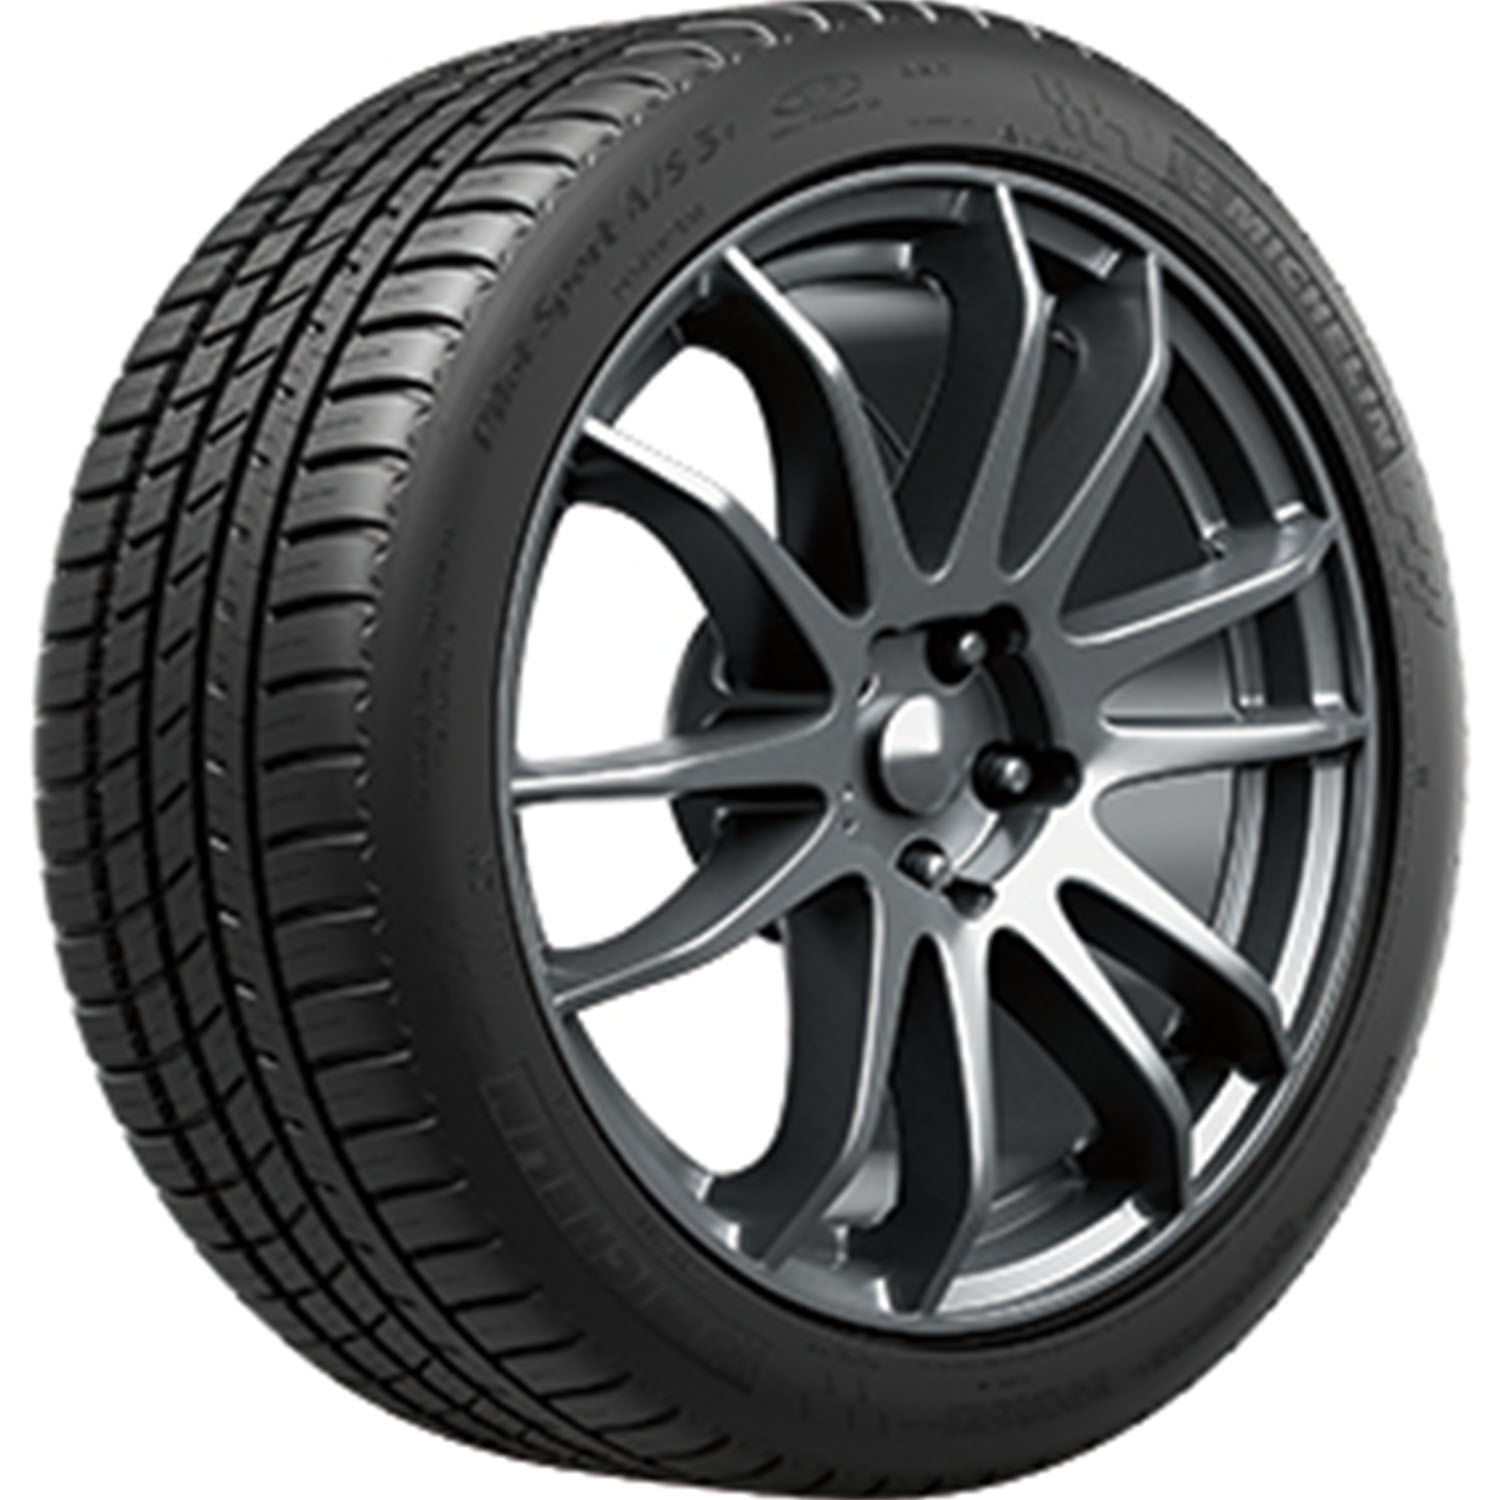 Michelin Pilot Sport A/S 3+ UHP All Season 235/55ZR19 105Y XL Passenger Tire - image 1 of 4